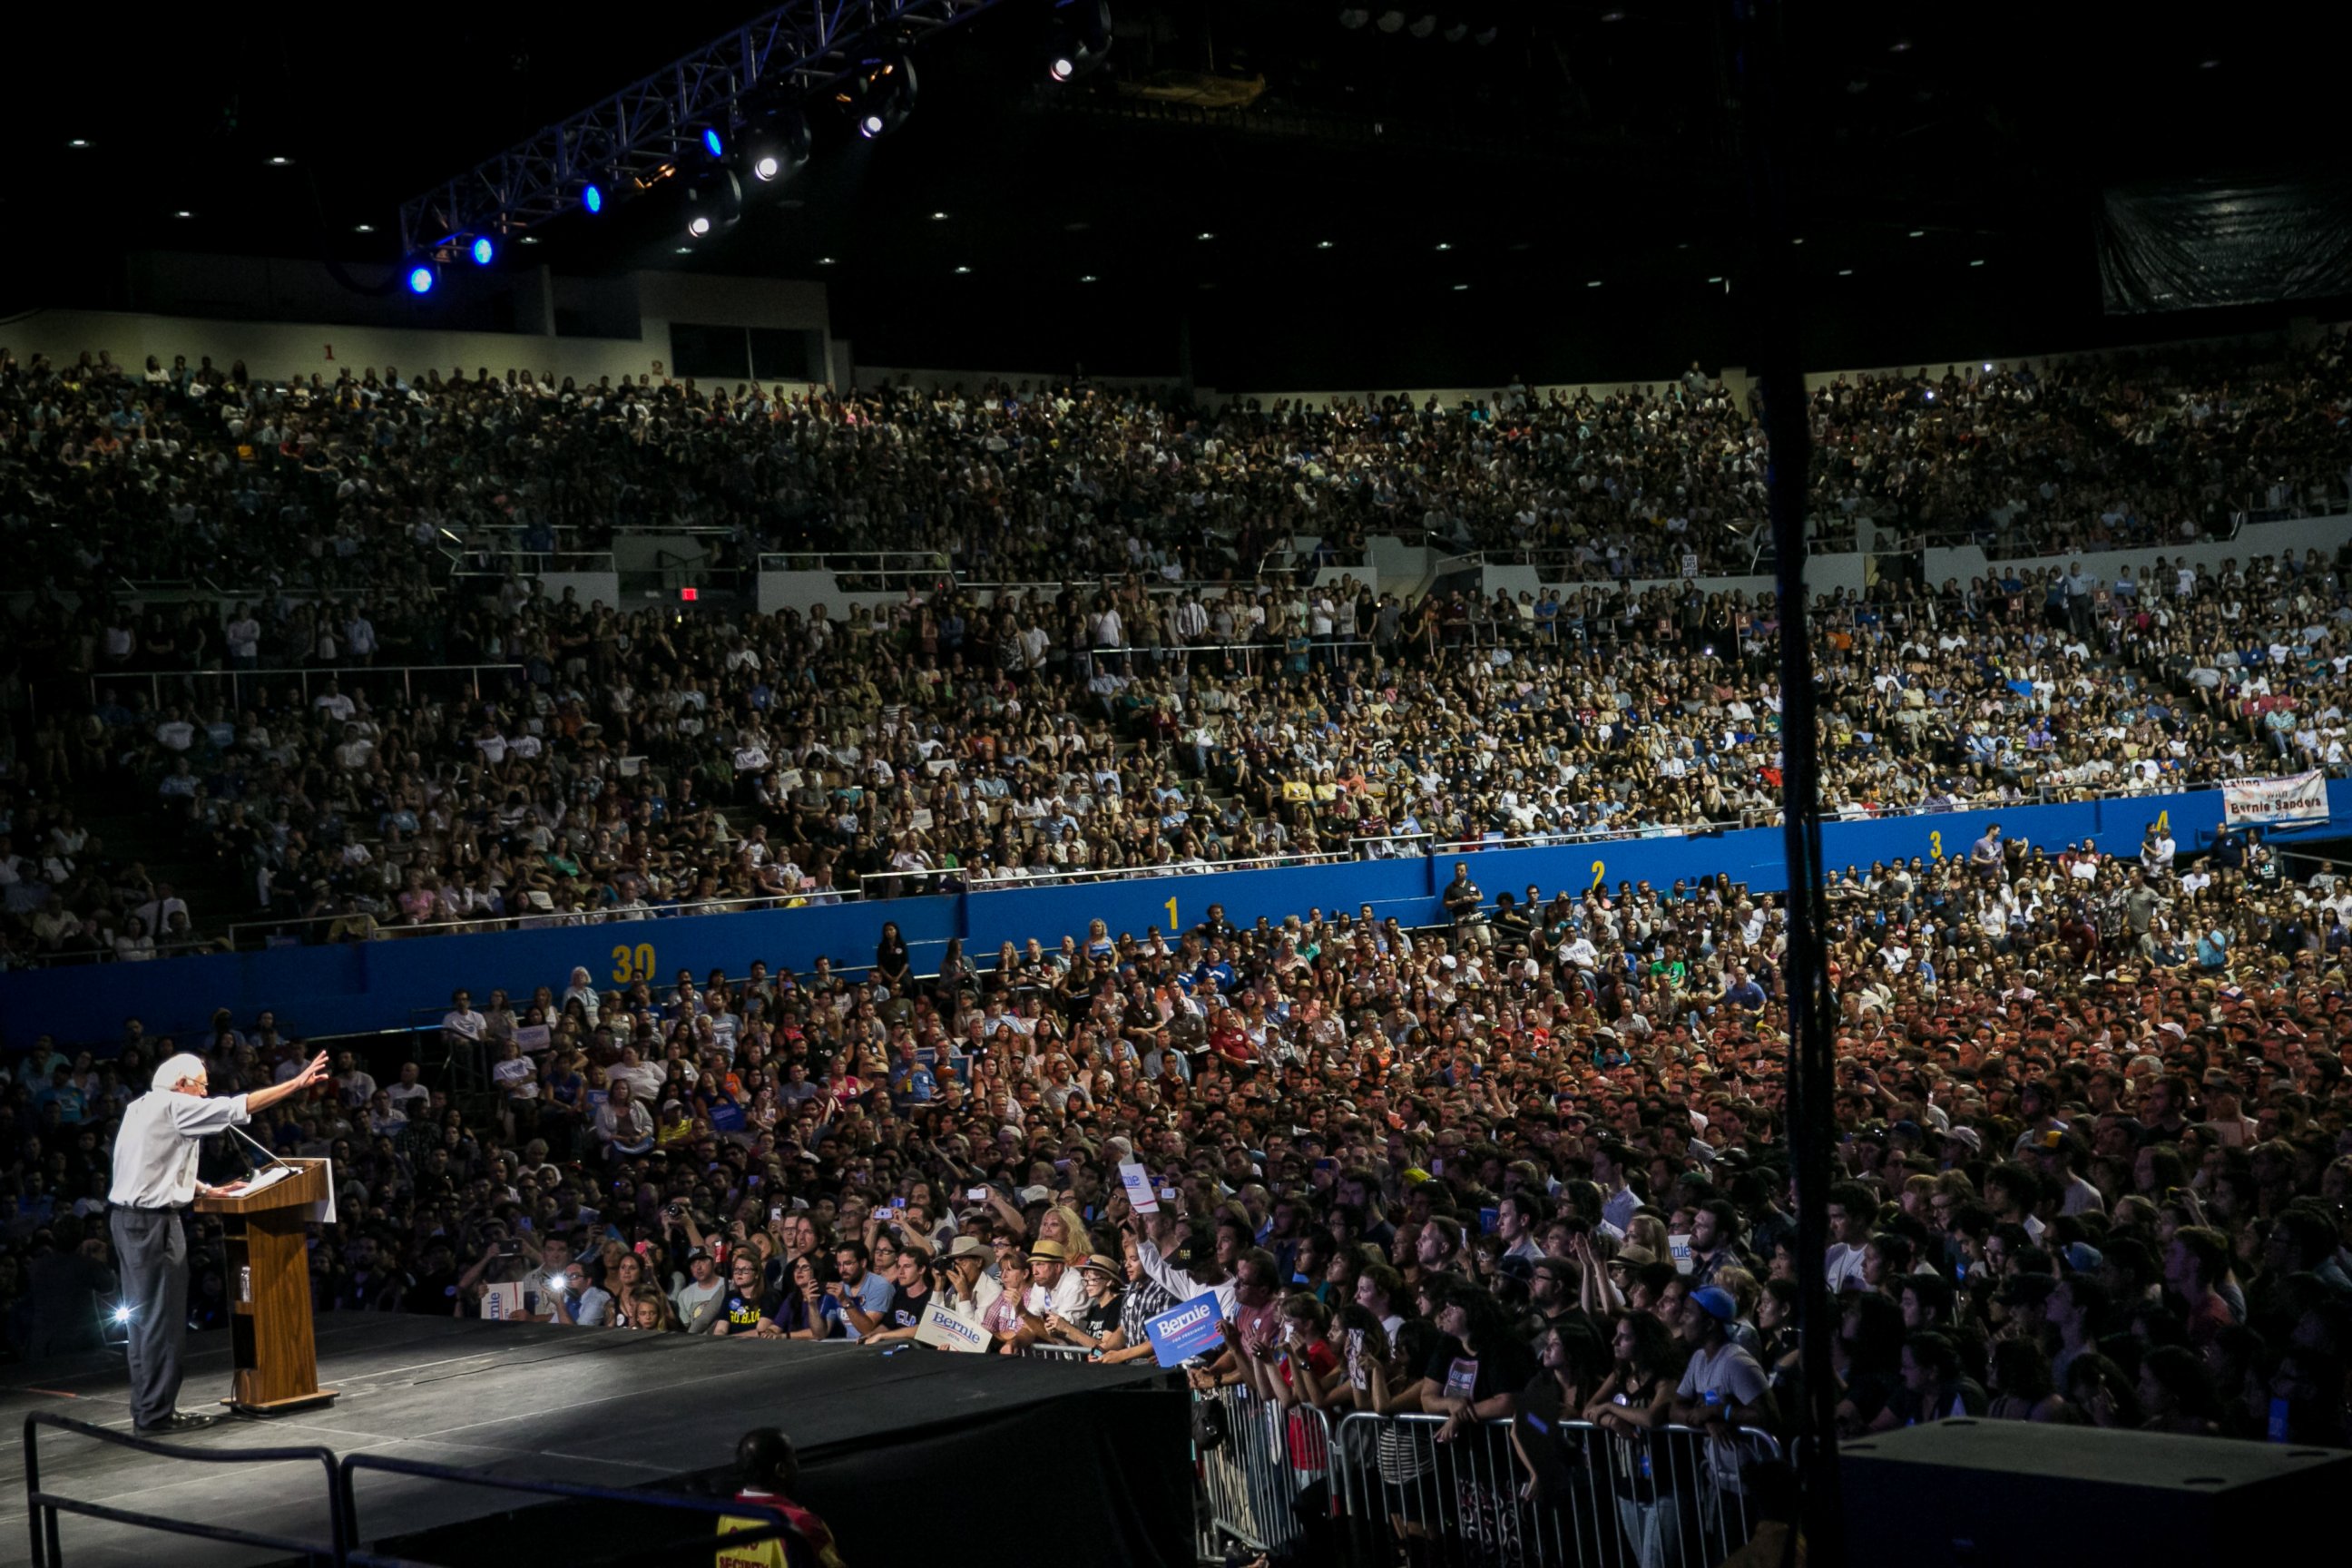 PHOTO: Presidential candidate Bernie Sanders speaks to a sold out crowd during a campaign event in Los Angeles, Calif., Aug. 10, 2015.